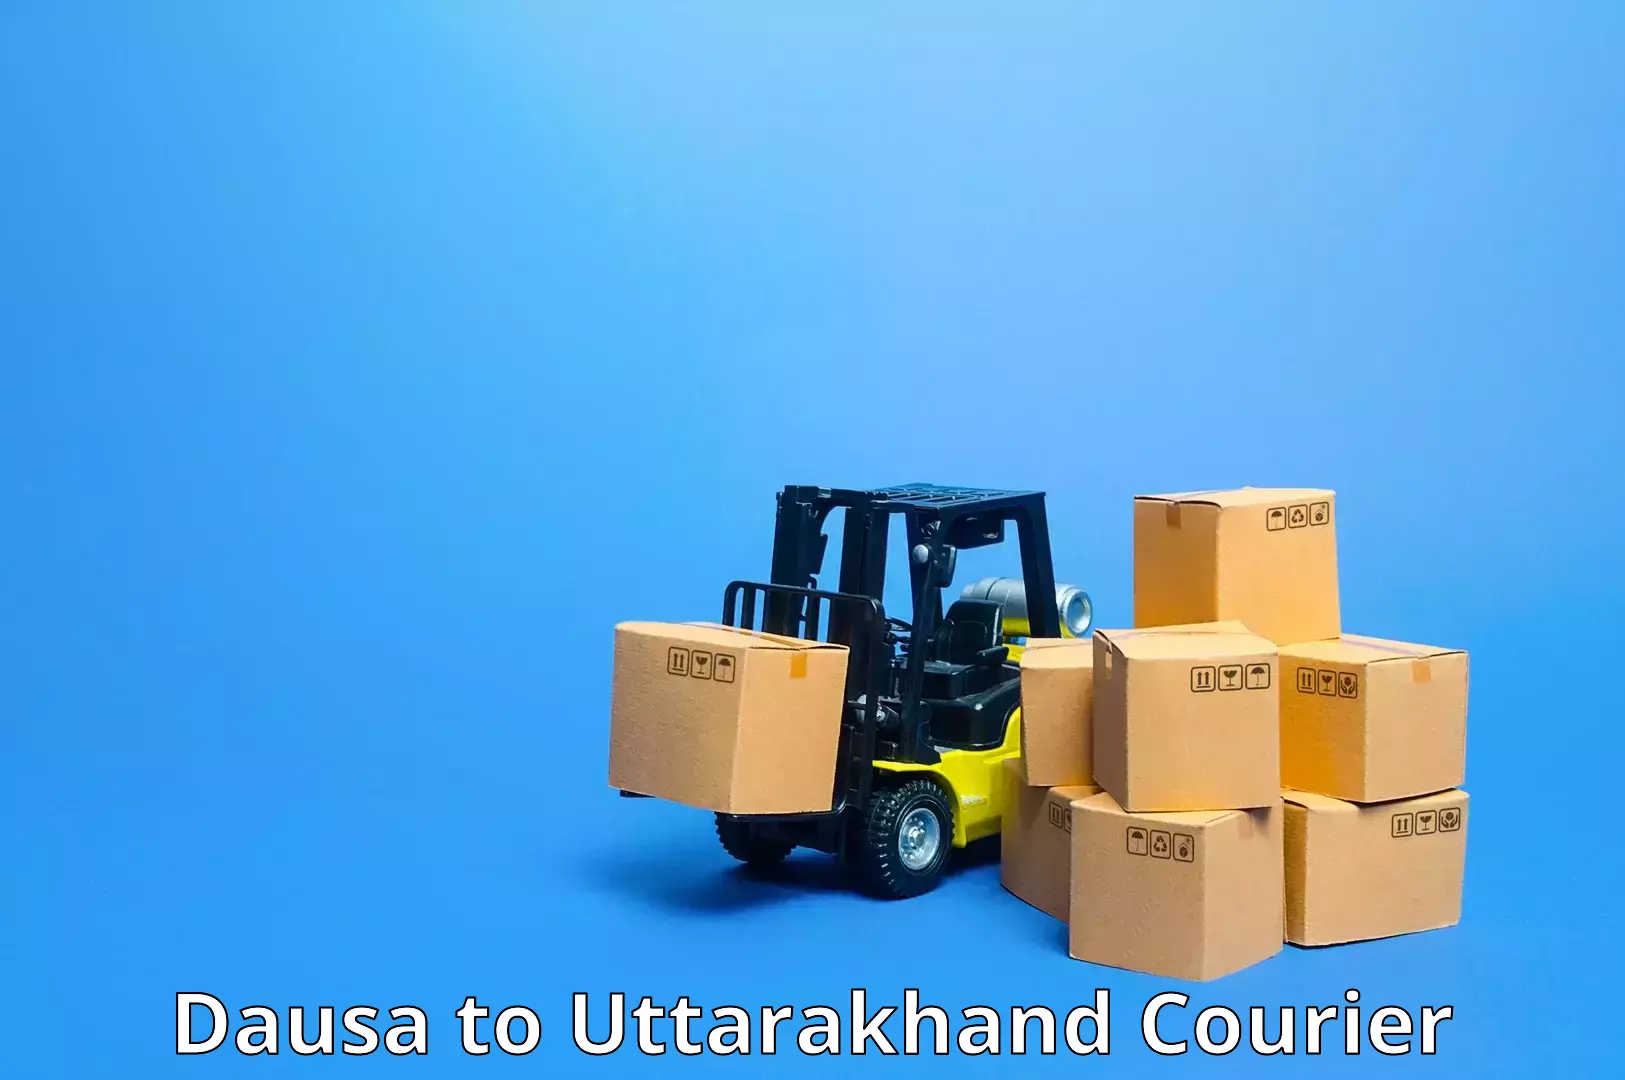 High-capacity courier solutions Dausa to Roorkee